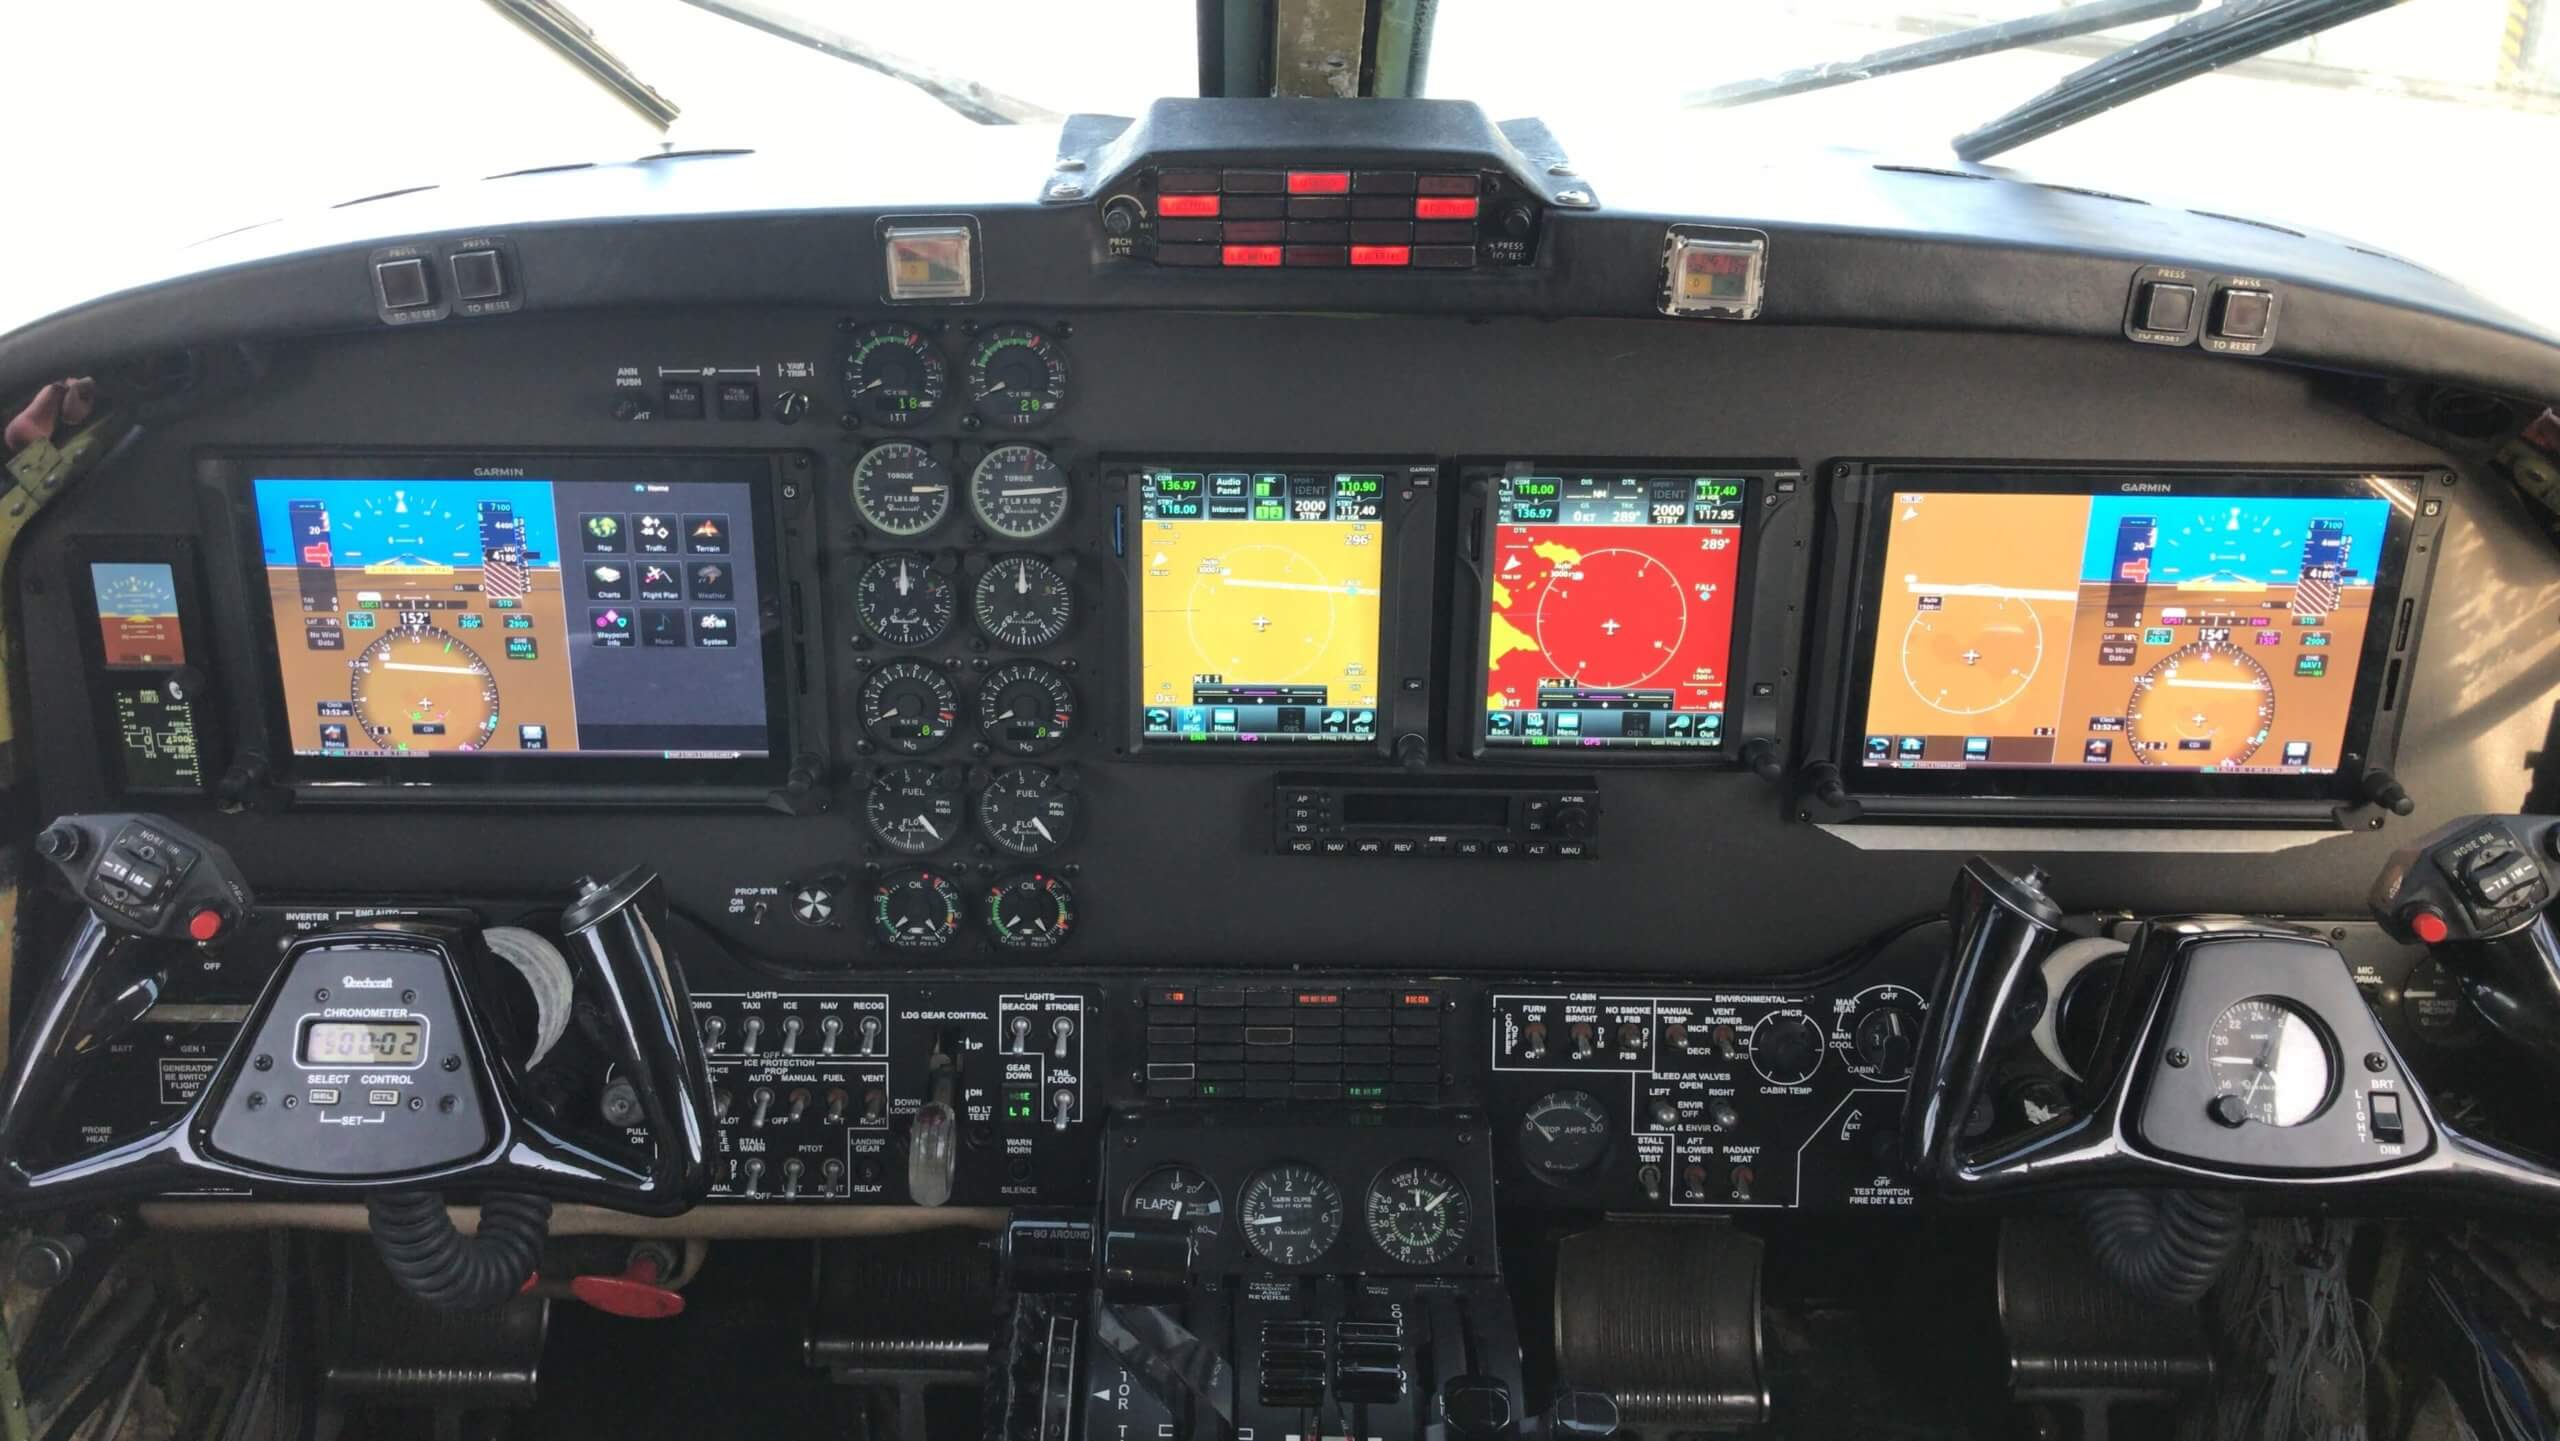 Install Dual Garmin G600TXi's, S-TEC / Genesys 2100 Autopilot system, GTS825 Traffic System, Mid-Continent Standby Attitude Module, New Audio Panels, Transponders and ADS-B In and Out Compliant, in a Kingair B200.